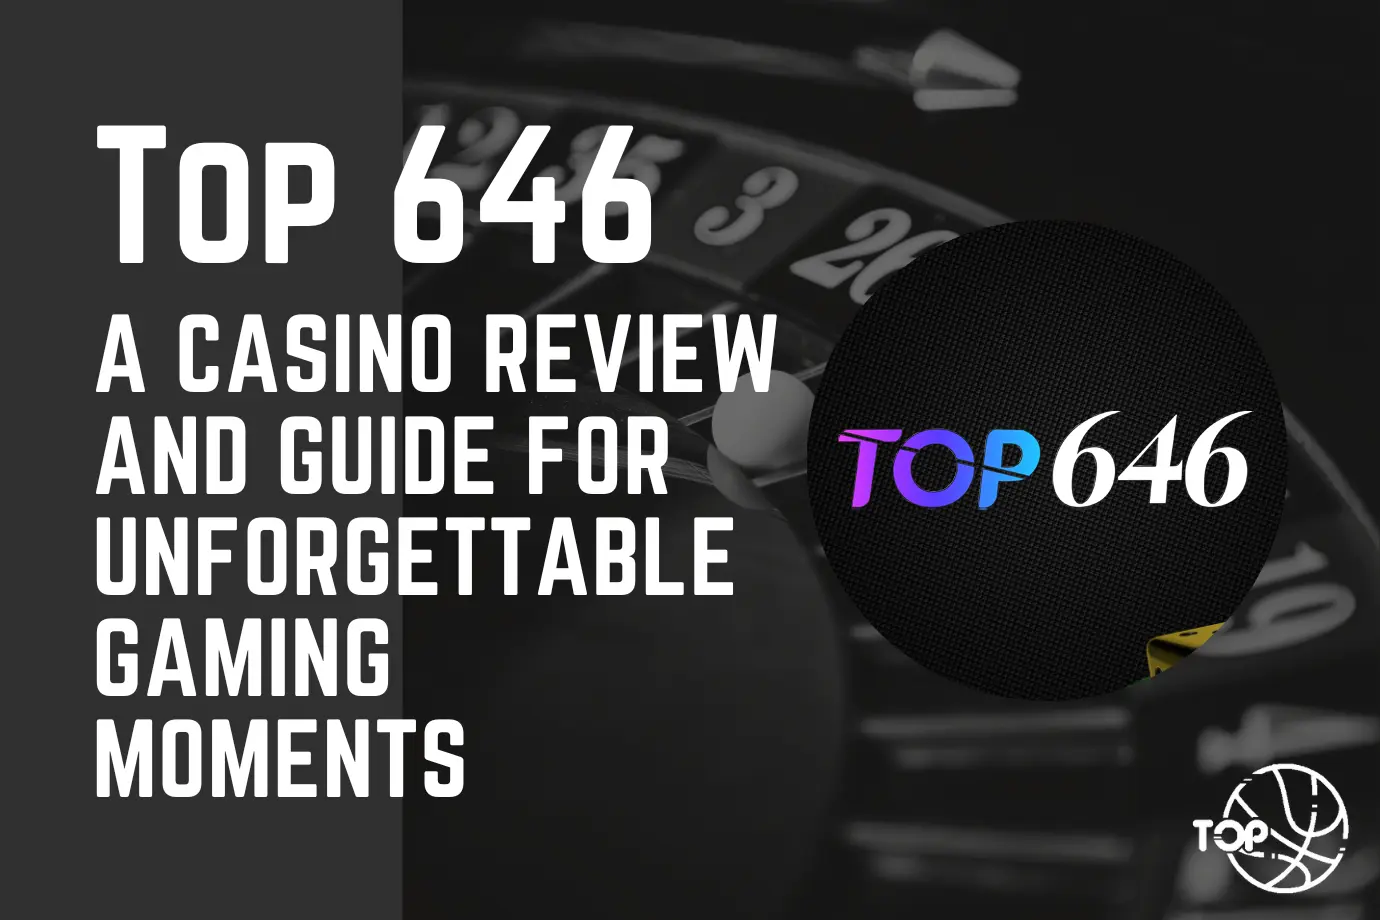 Top 646 A Casino Review and Guide for Unforgettable Gaming Moments